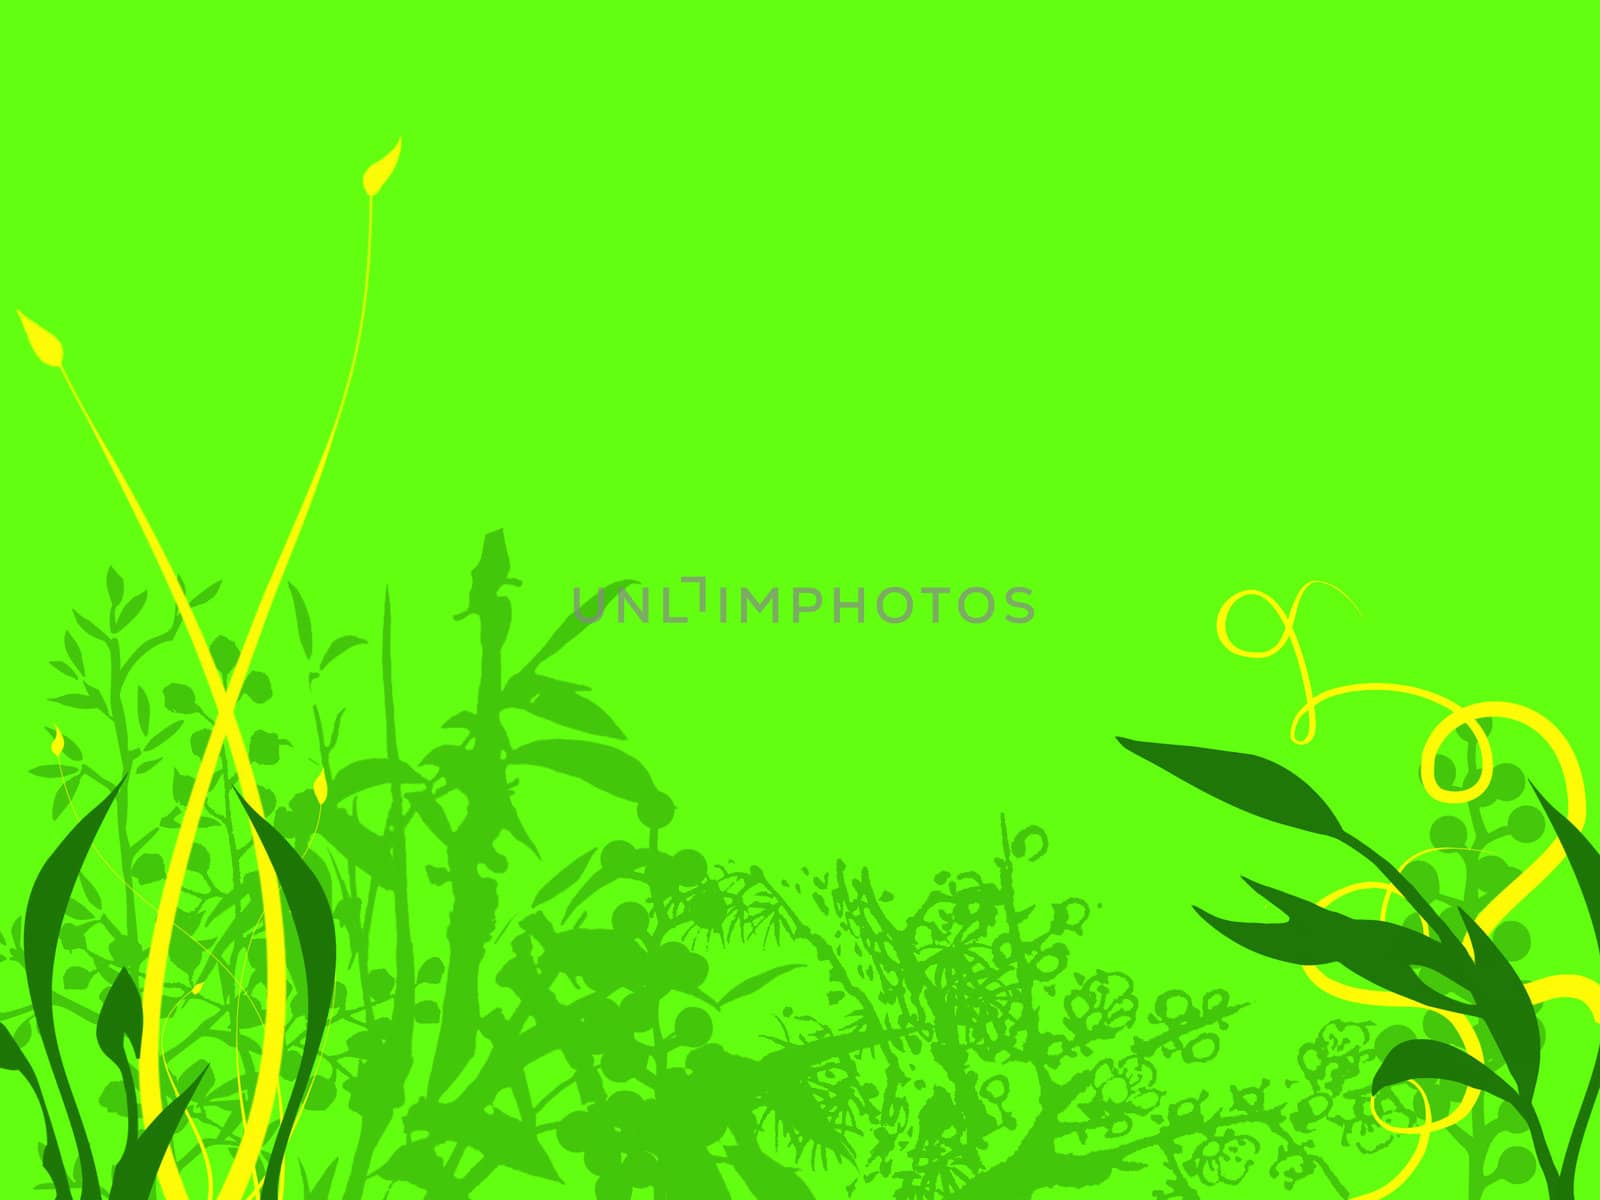 Abstract Background Texture Flowers and Leaves in Dark Green and Yellow on a neon Green Background